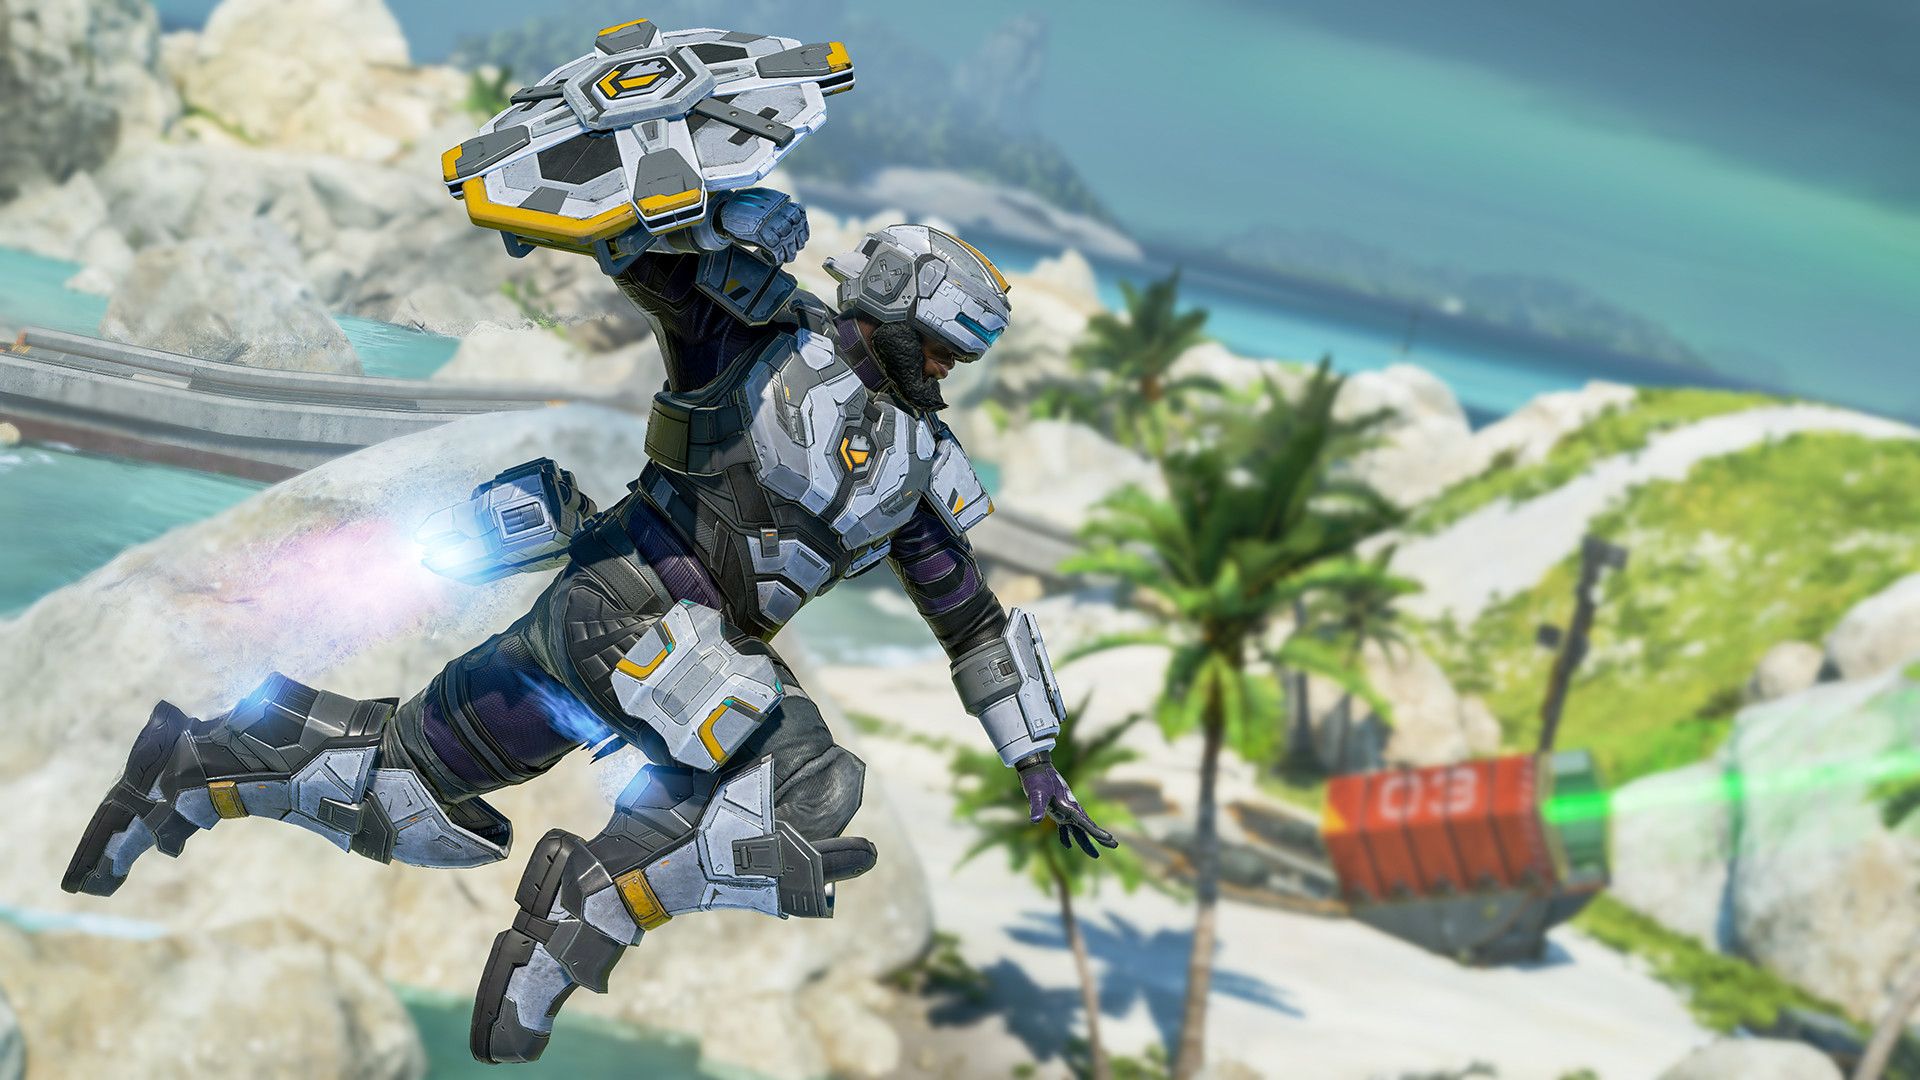 Video game screenshot of a man in gray armor flying over a beach